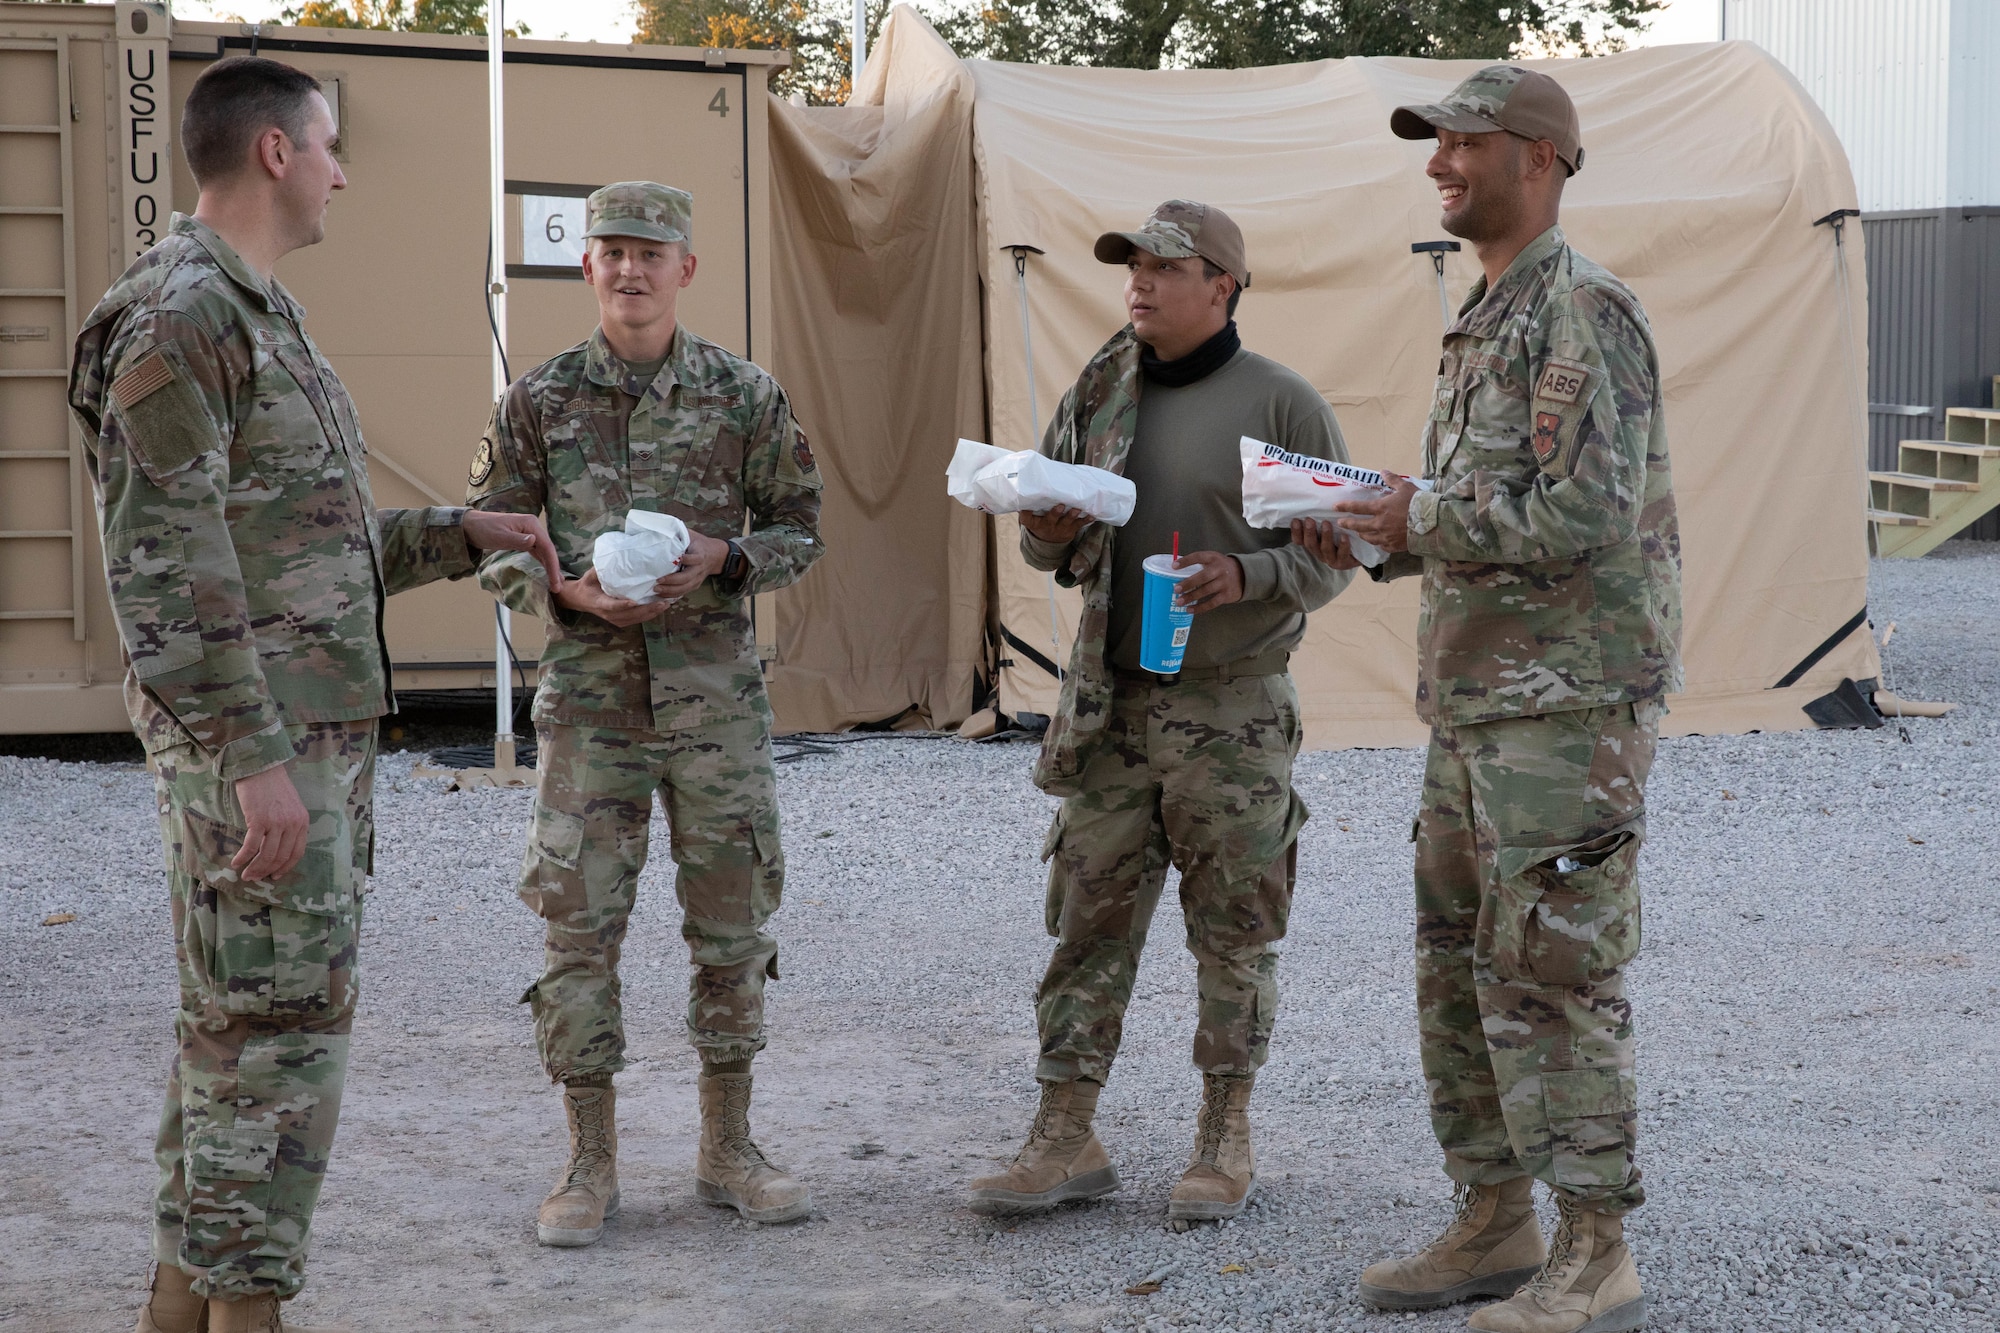 U.S. Air Force Airmen assigned to Task Force Holloman receive care packages from Operation Gratitude, as a thanks for their hard work on Holloman Air Force Base, New Mexico, Oct. 19, 2021. The Department of Defense, through U.S. Northern Command, and in support of the Department of Homeland Security, is providing transportation, temporary housing, medical screening, and general support for at least 50,000 Afghan evacuees at suitable facilities, in permanent or temporary structures, as quickly as possible. This initiative provides Afghan personnel essential support at secure locations outside Afghanistan. (U.S. Army Photo By Pfc. Anthony Ford)